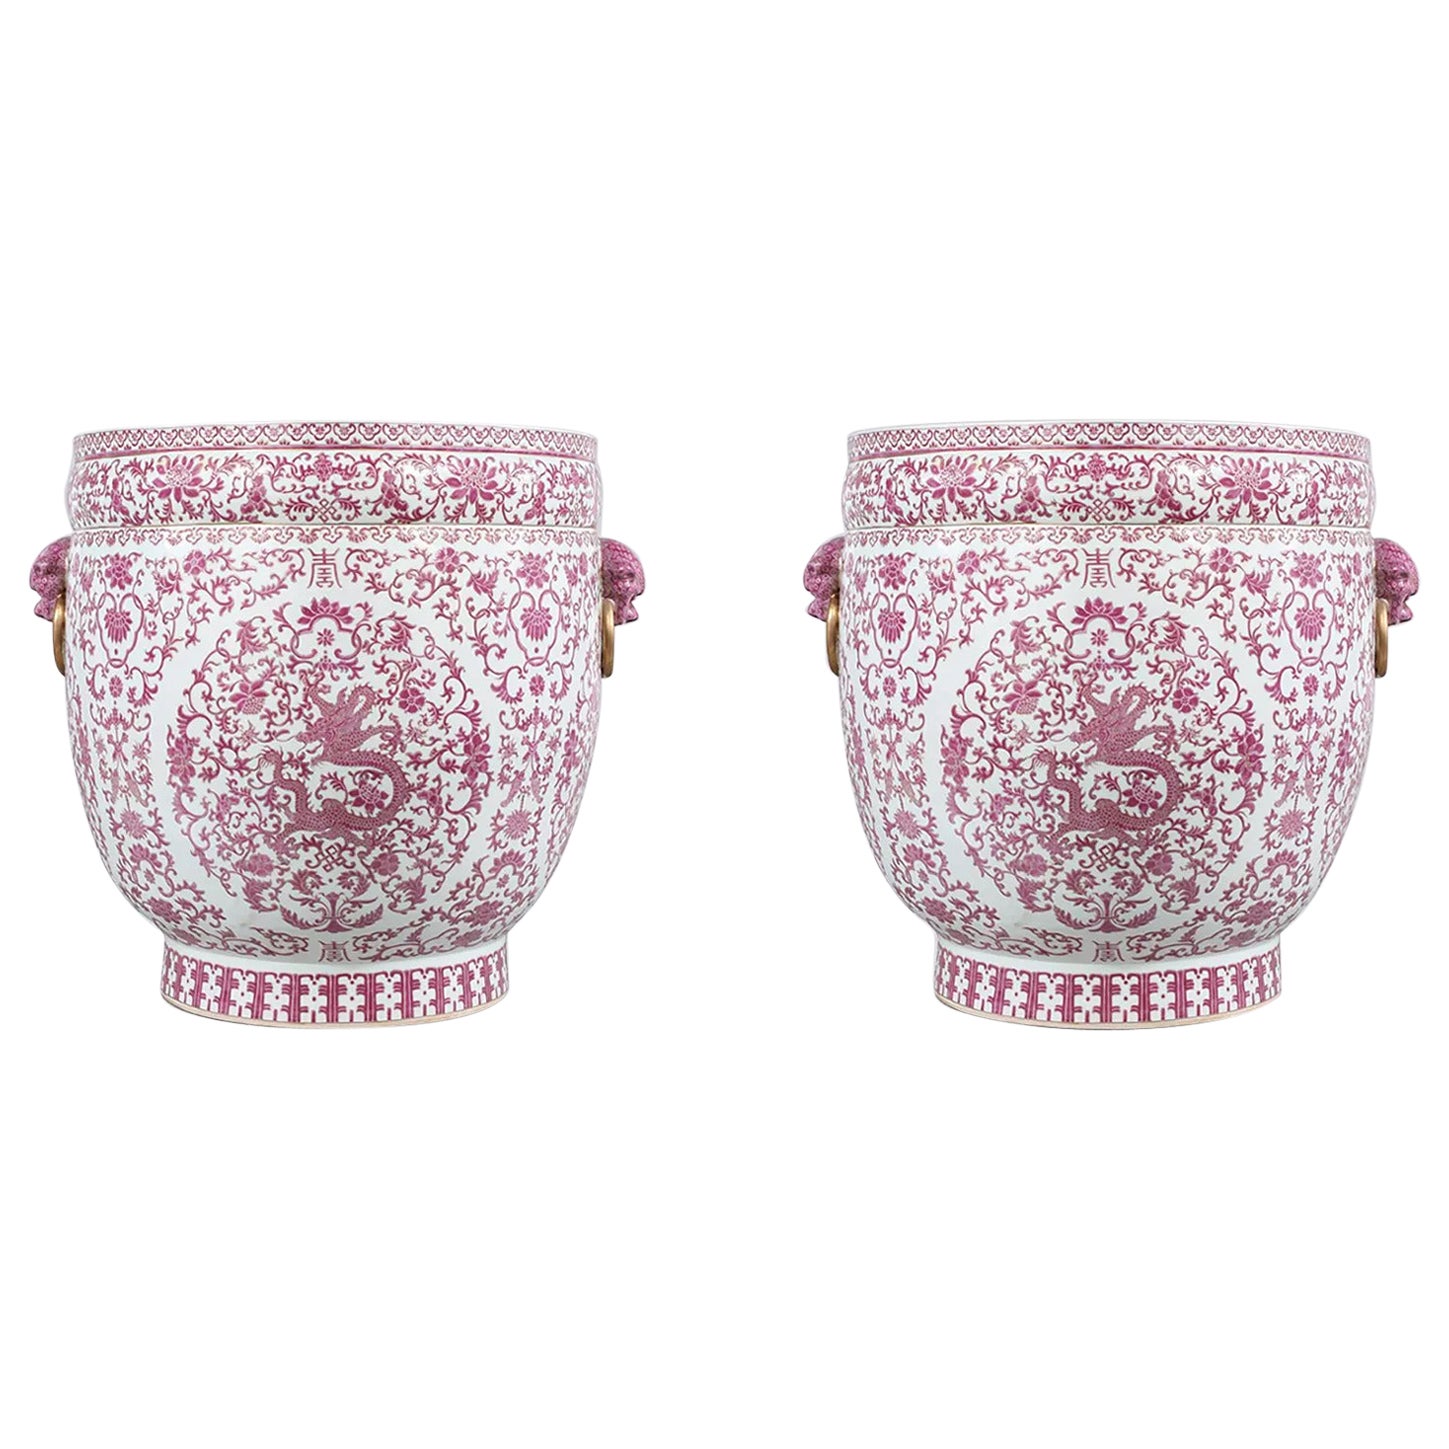 A Massive Pair of Chinese Pink and White Dragon Porcelain Planters, Republic